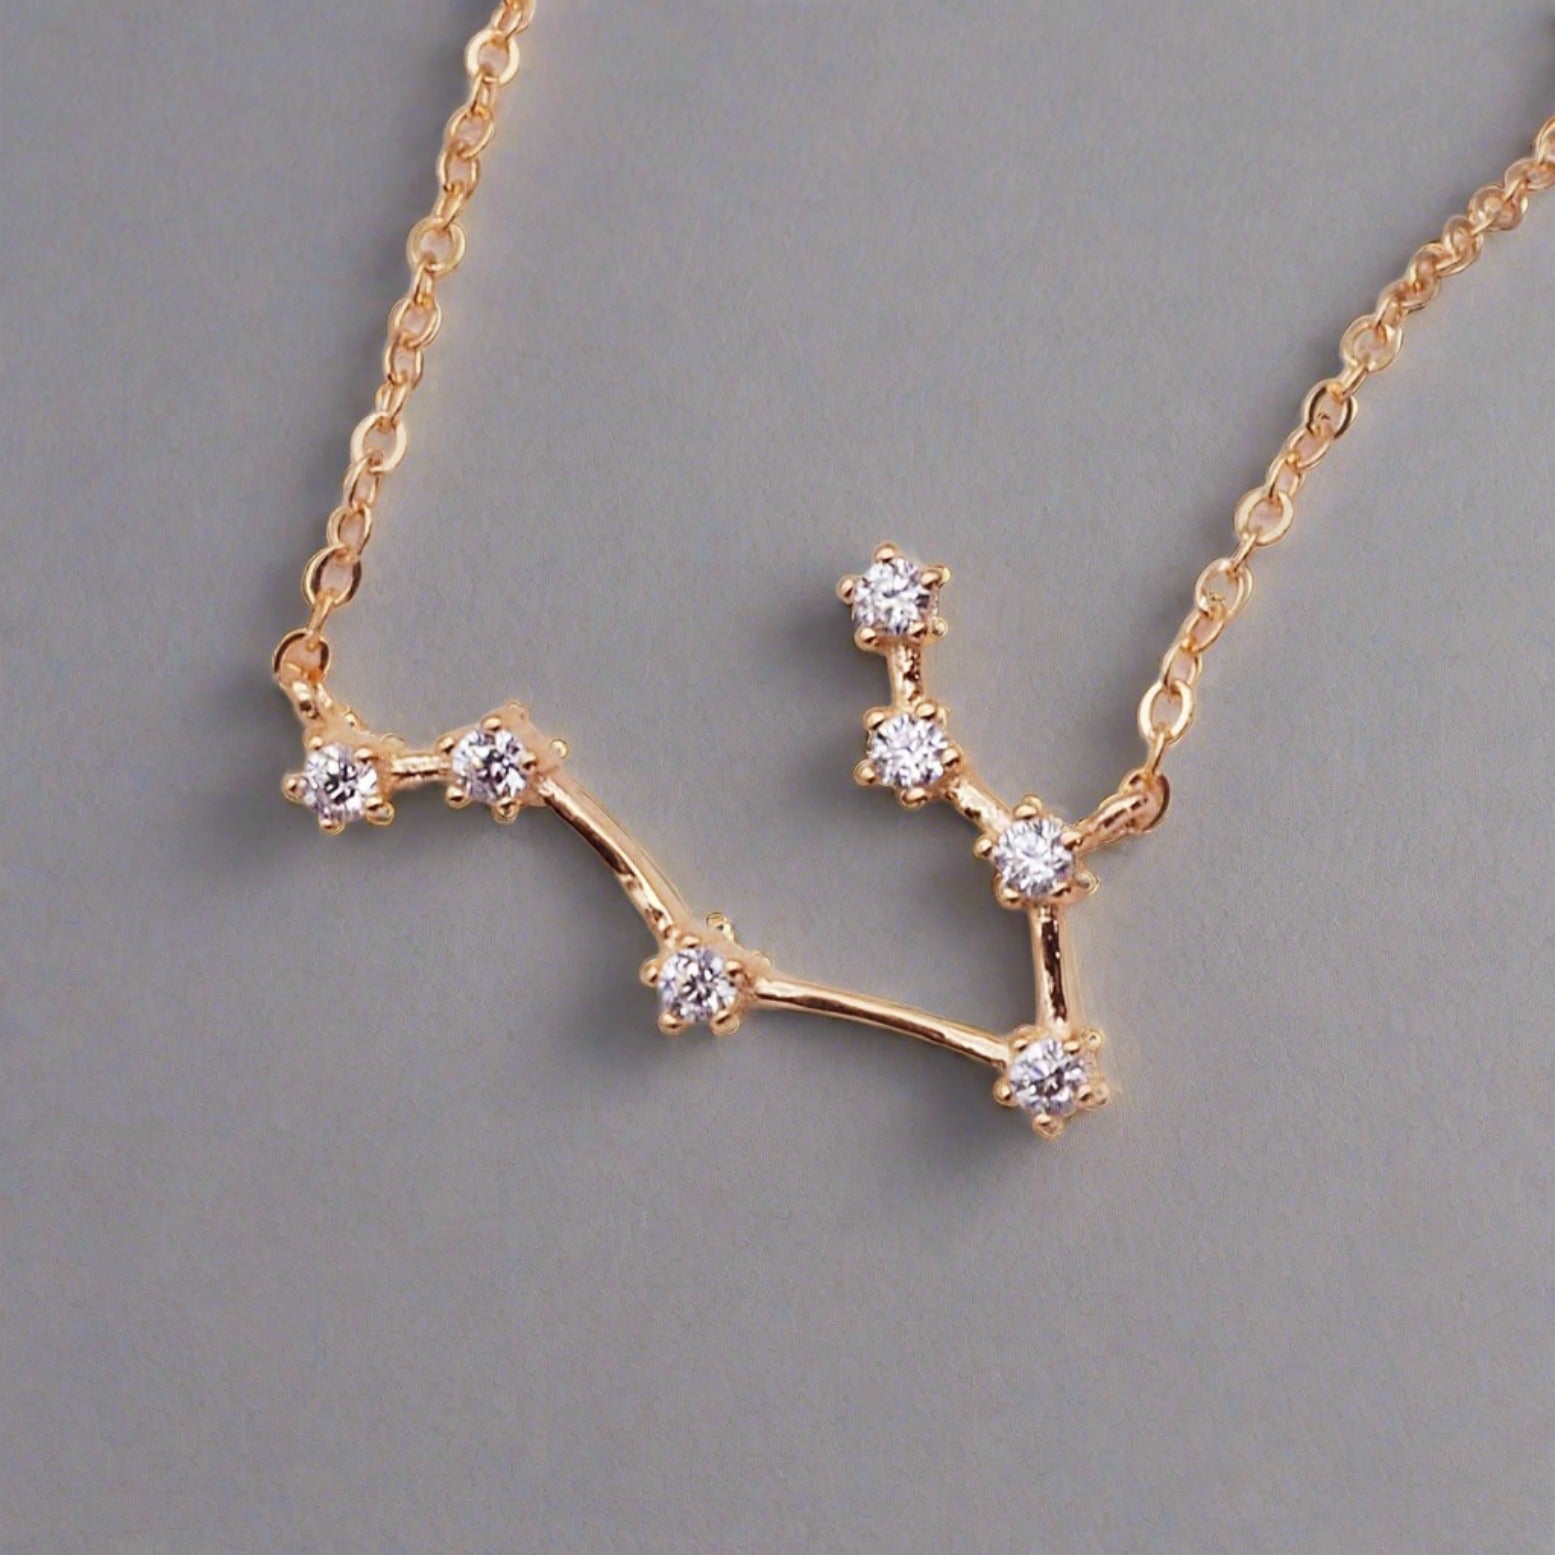 Gemini Constellation Necklace - womens jewellery by indie and harper